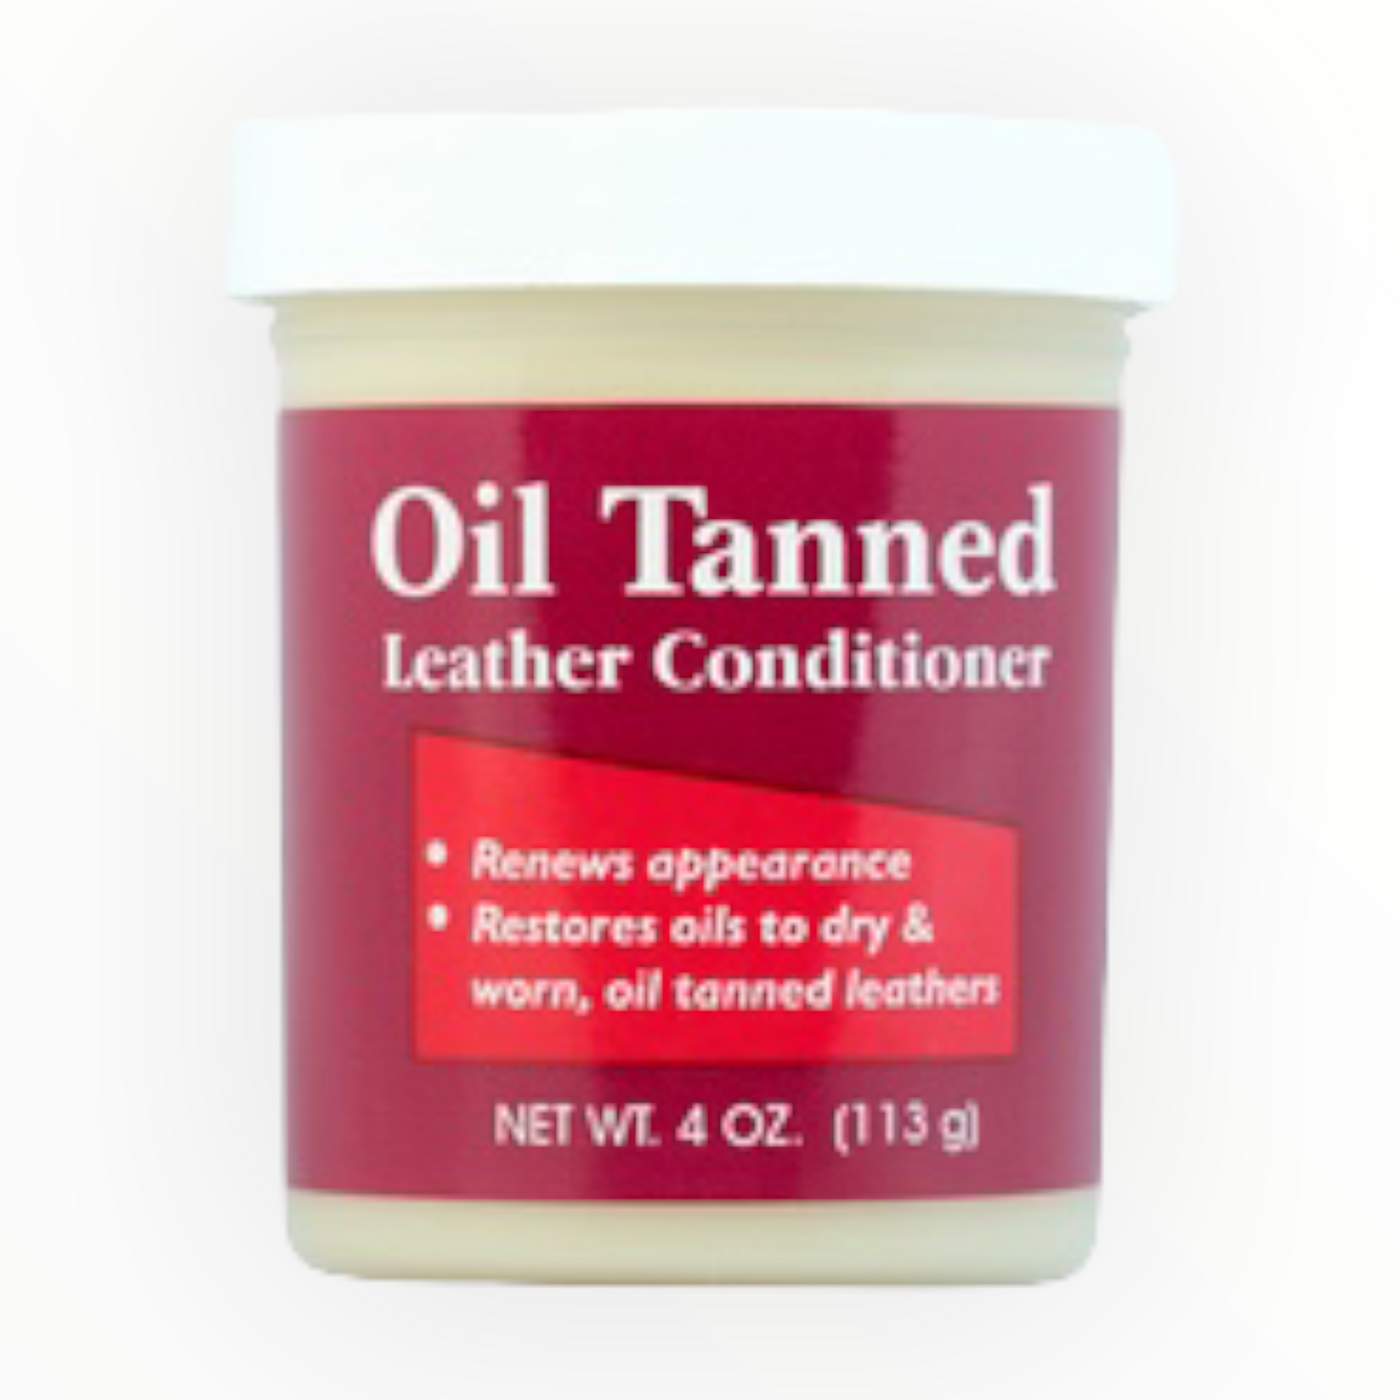 Oil Tanned Leather Conditioner